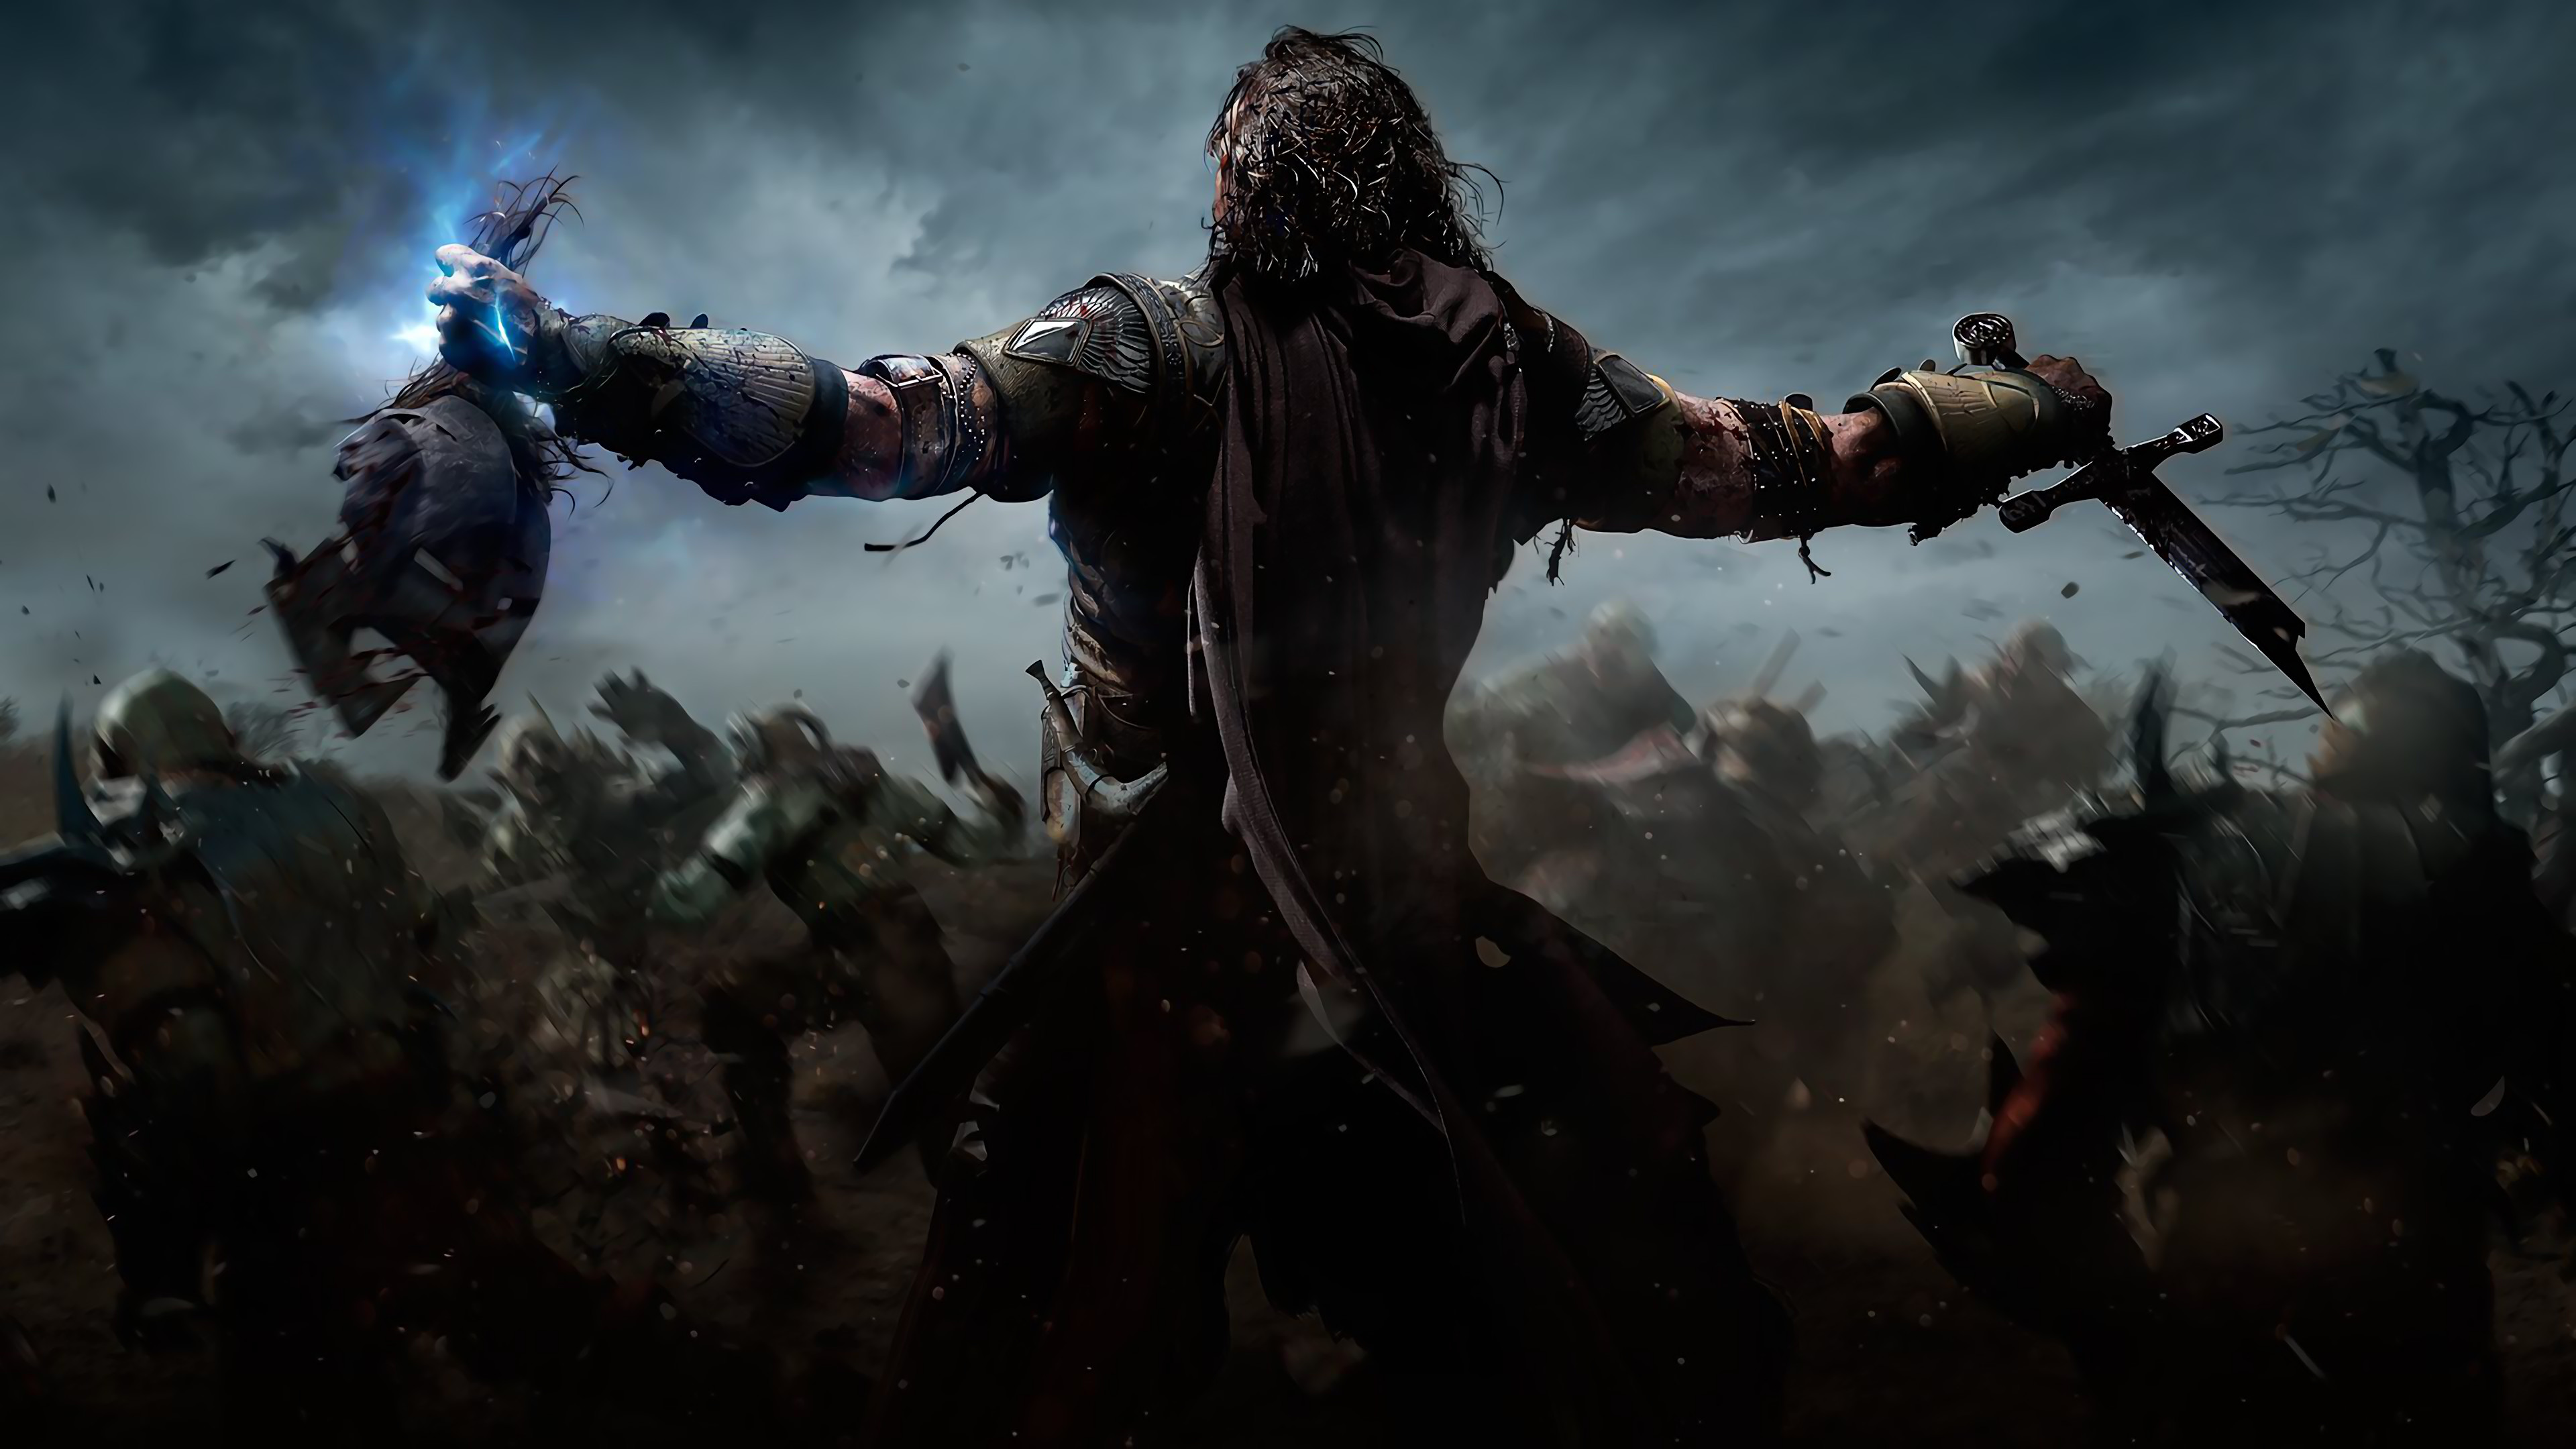 3840x2160 The Shadows of Mordor image for example: ...